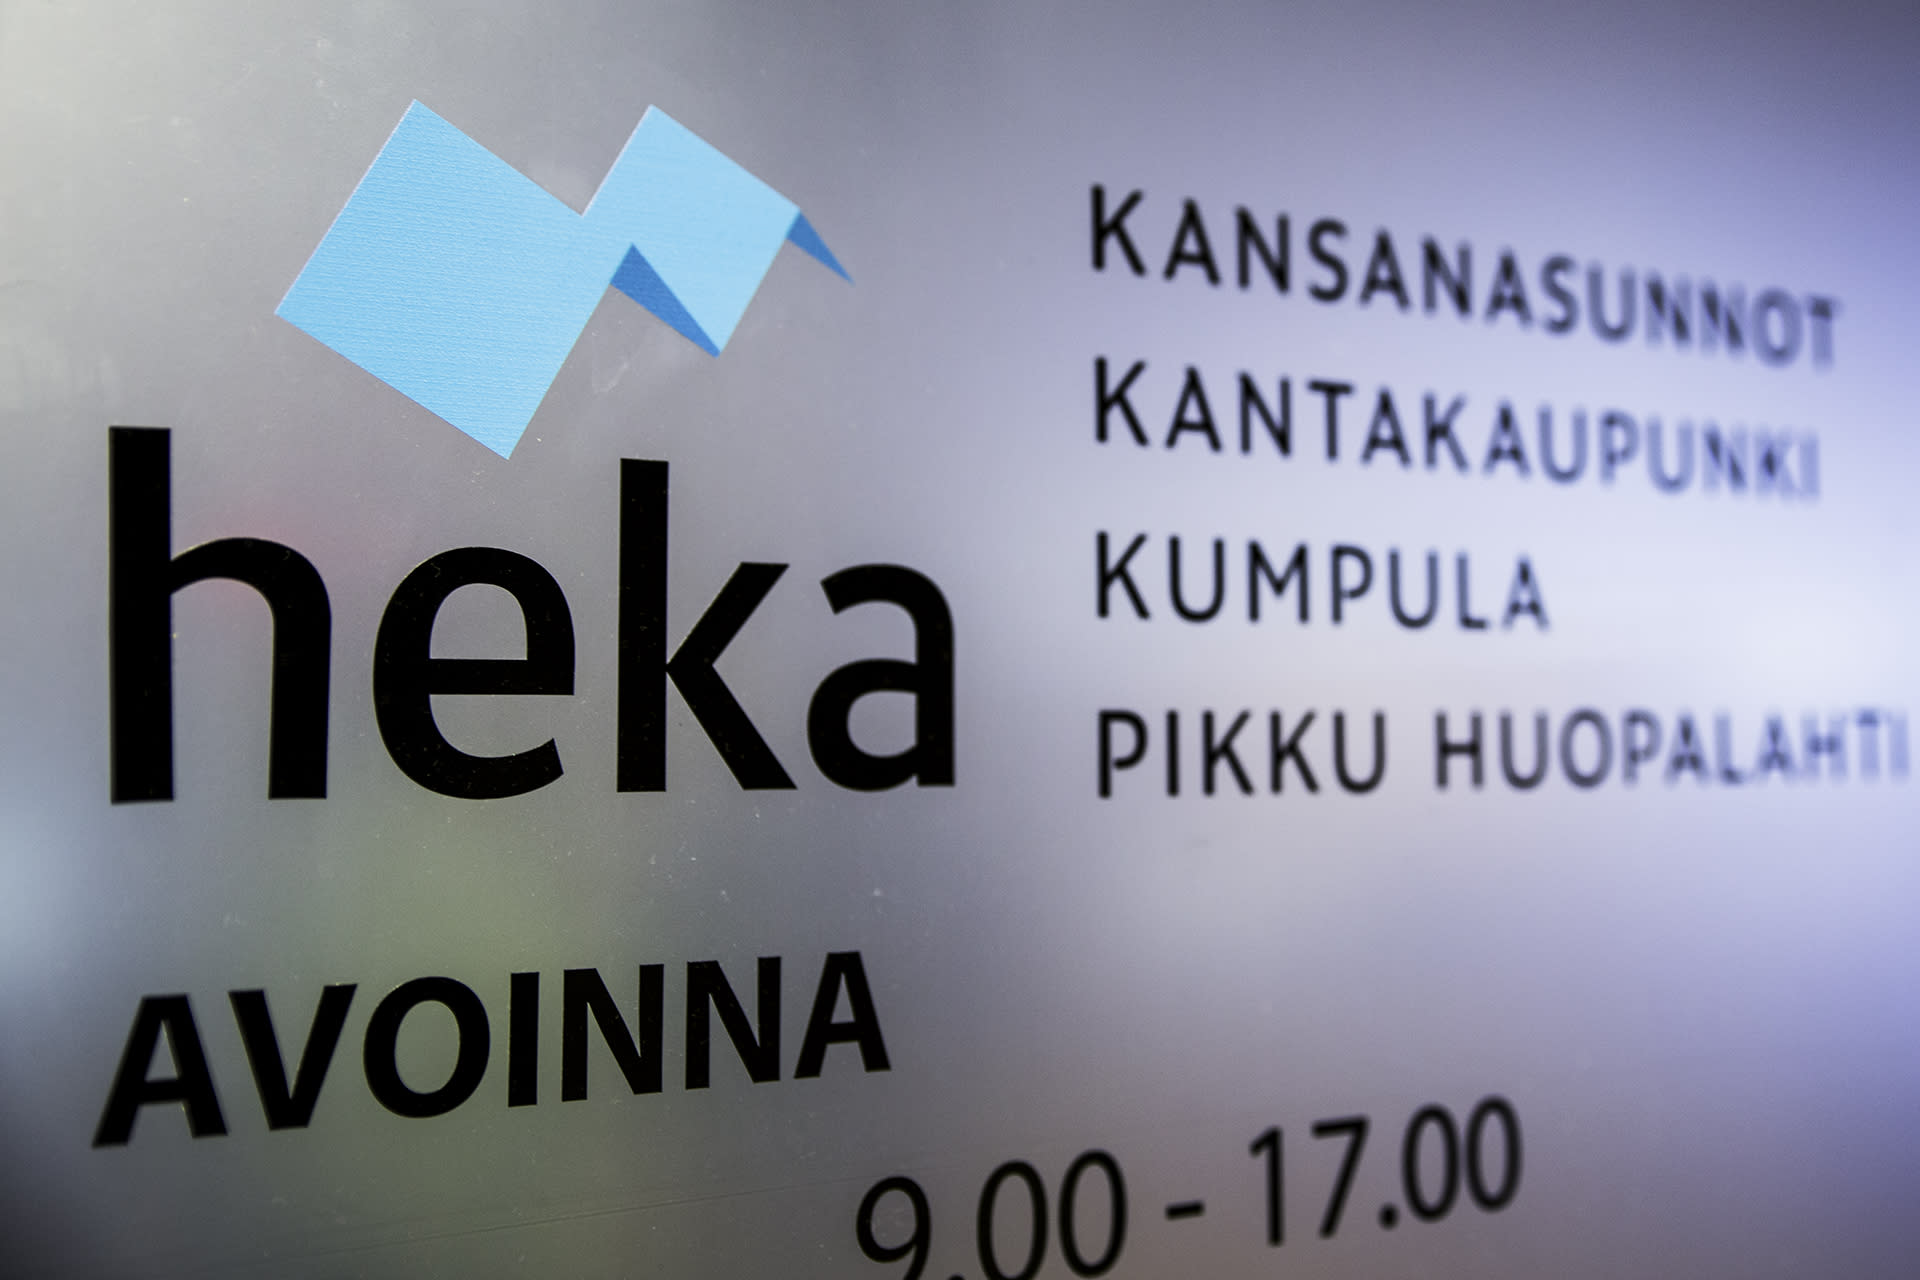 Finland's “largest landlord” Heka is cutting 15 jobs